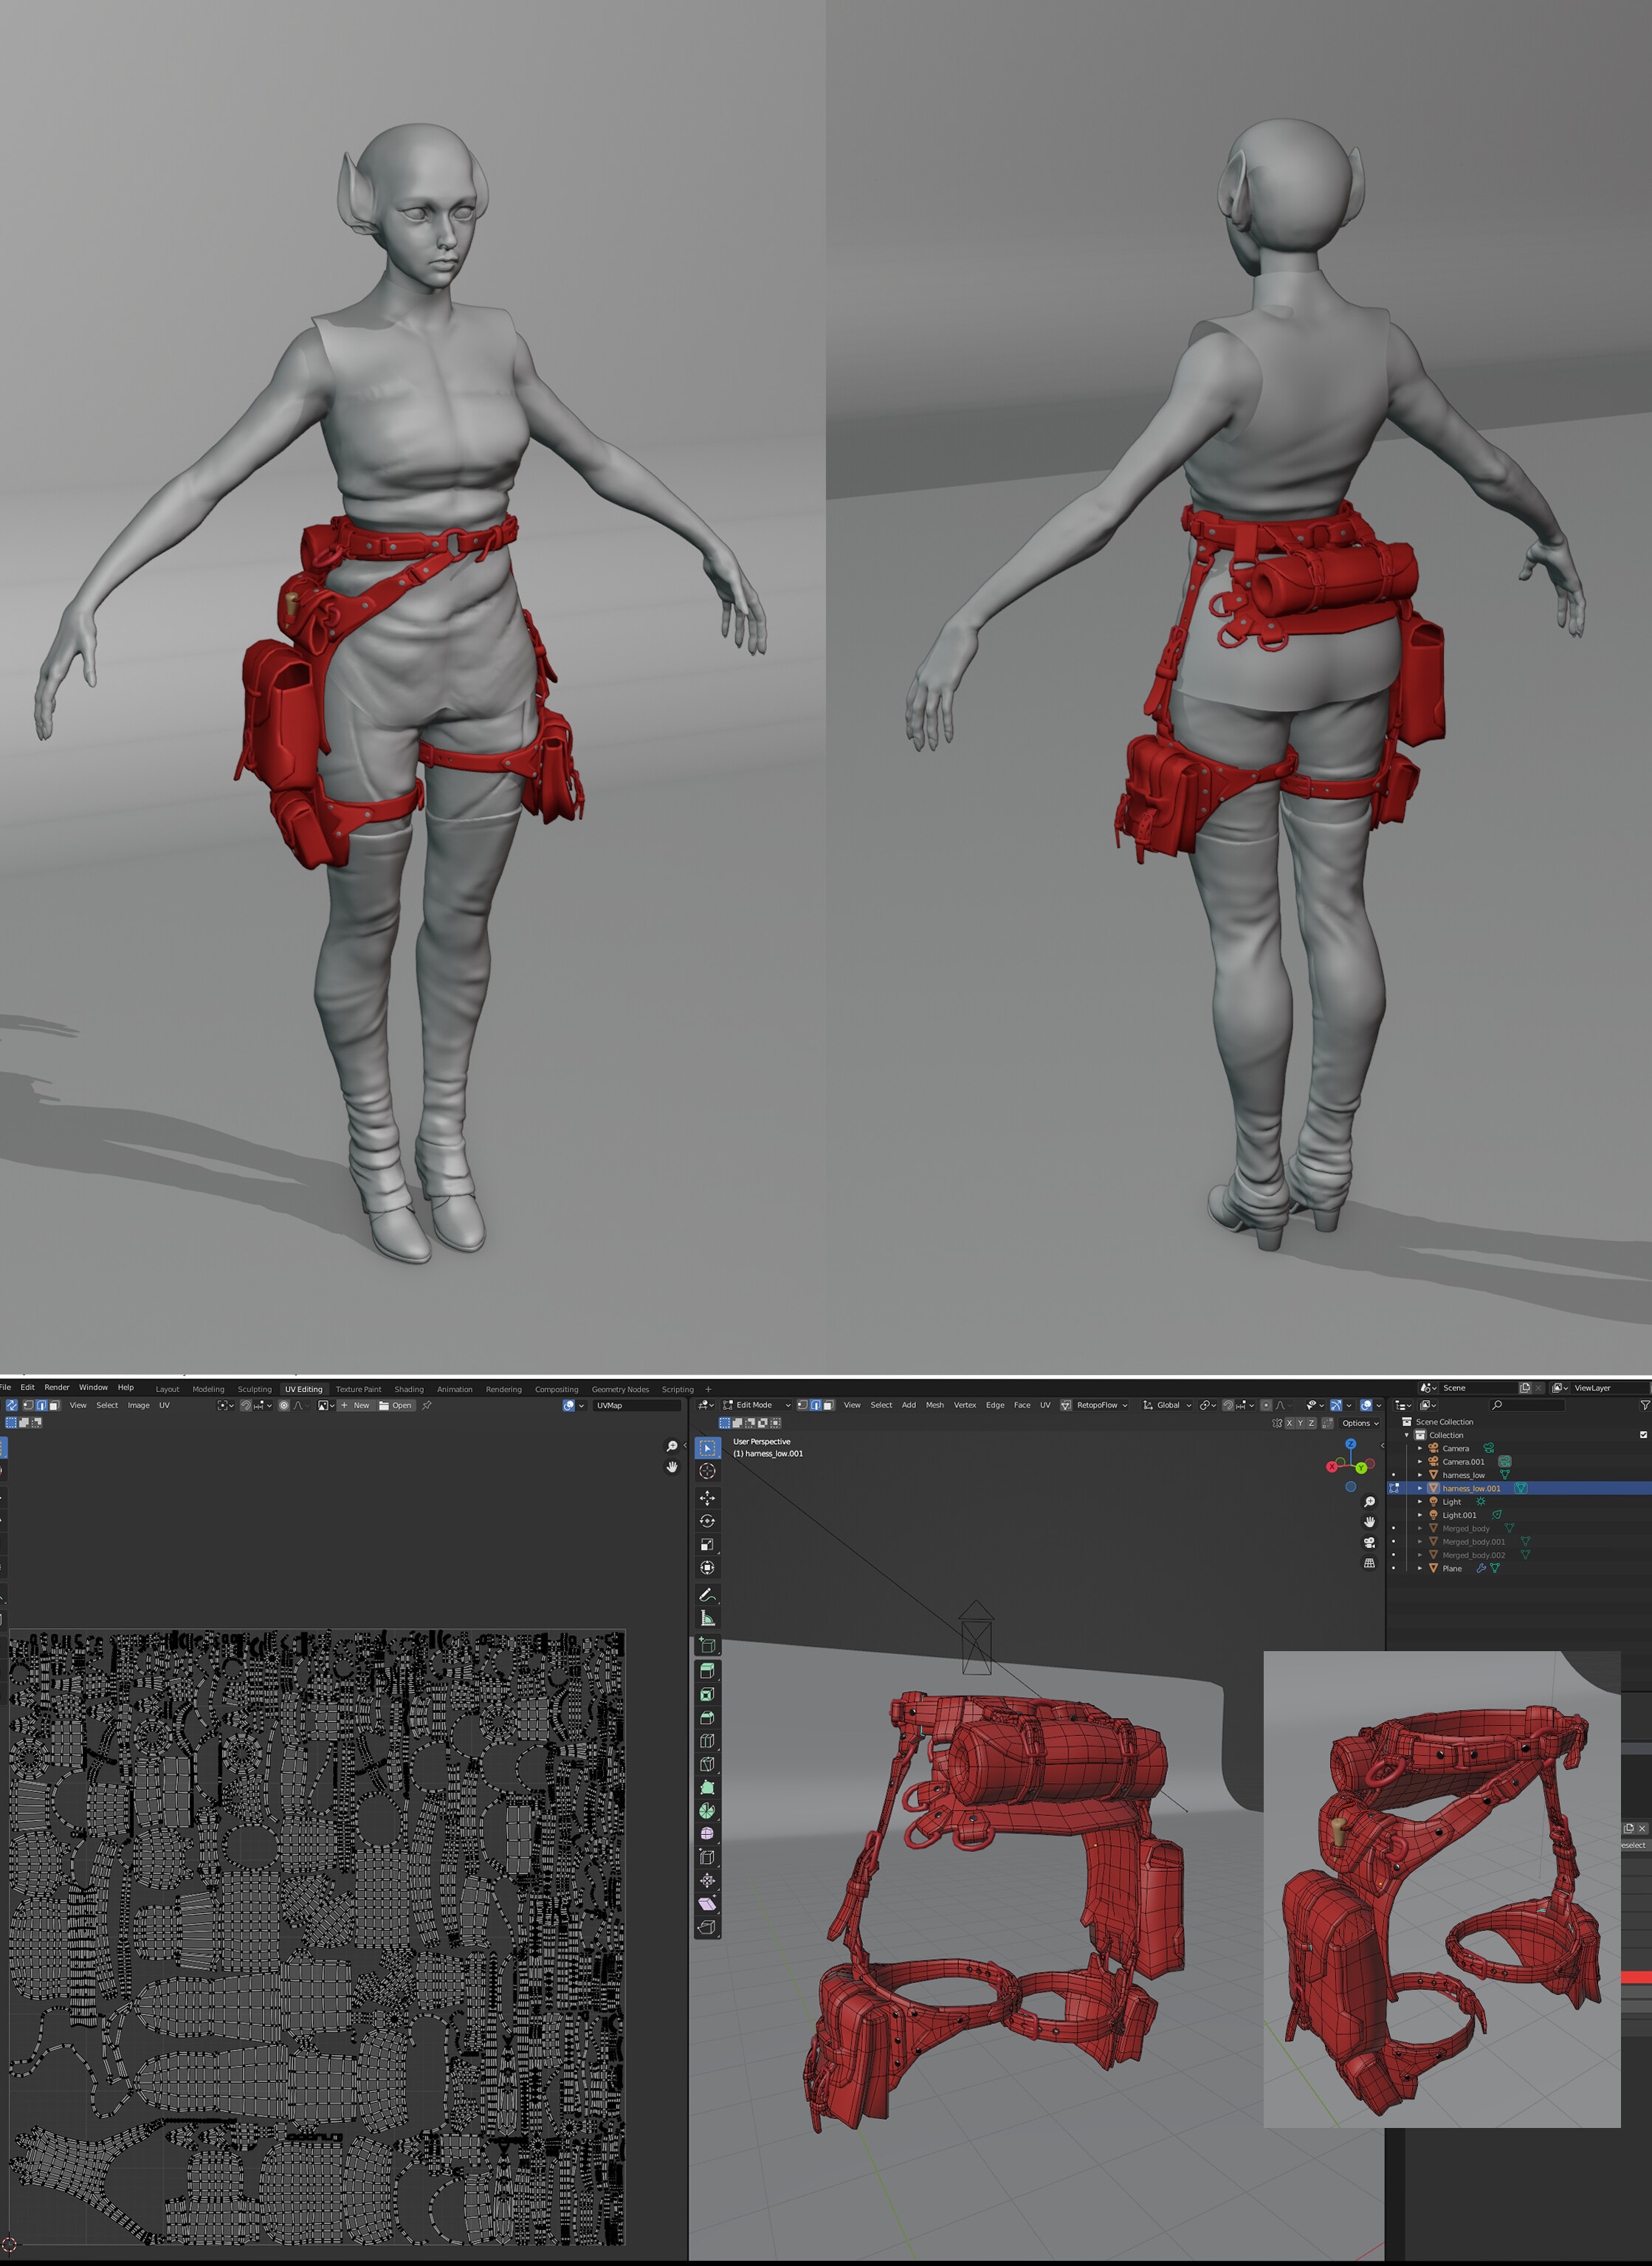 Low poly to high polyhow do you proceed? - Materials and